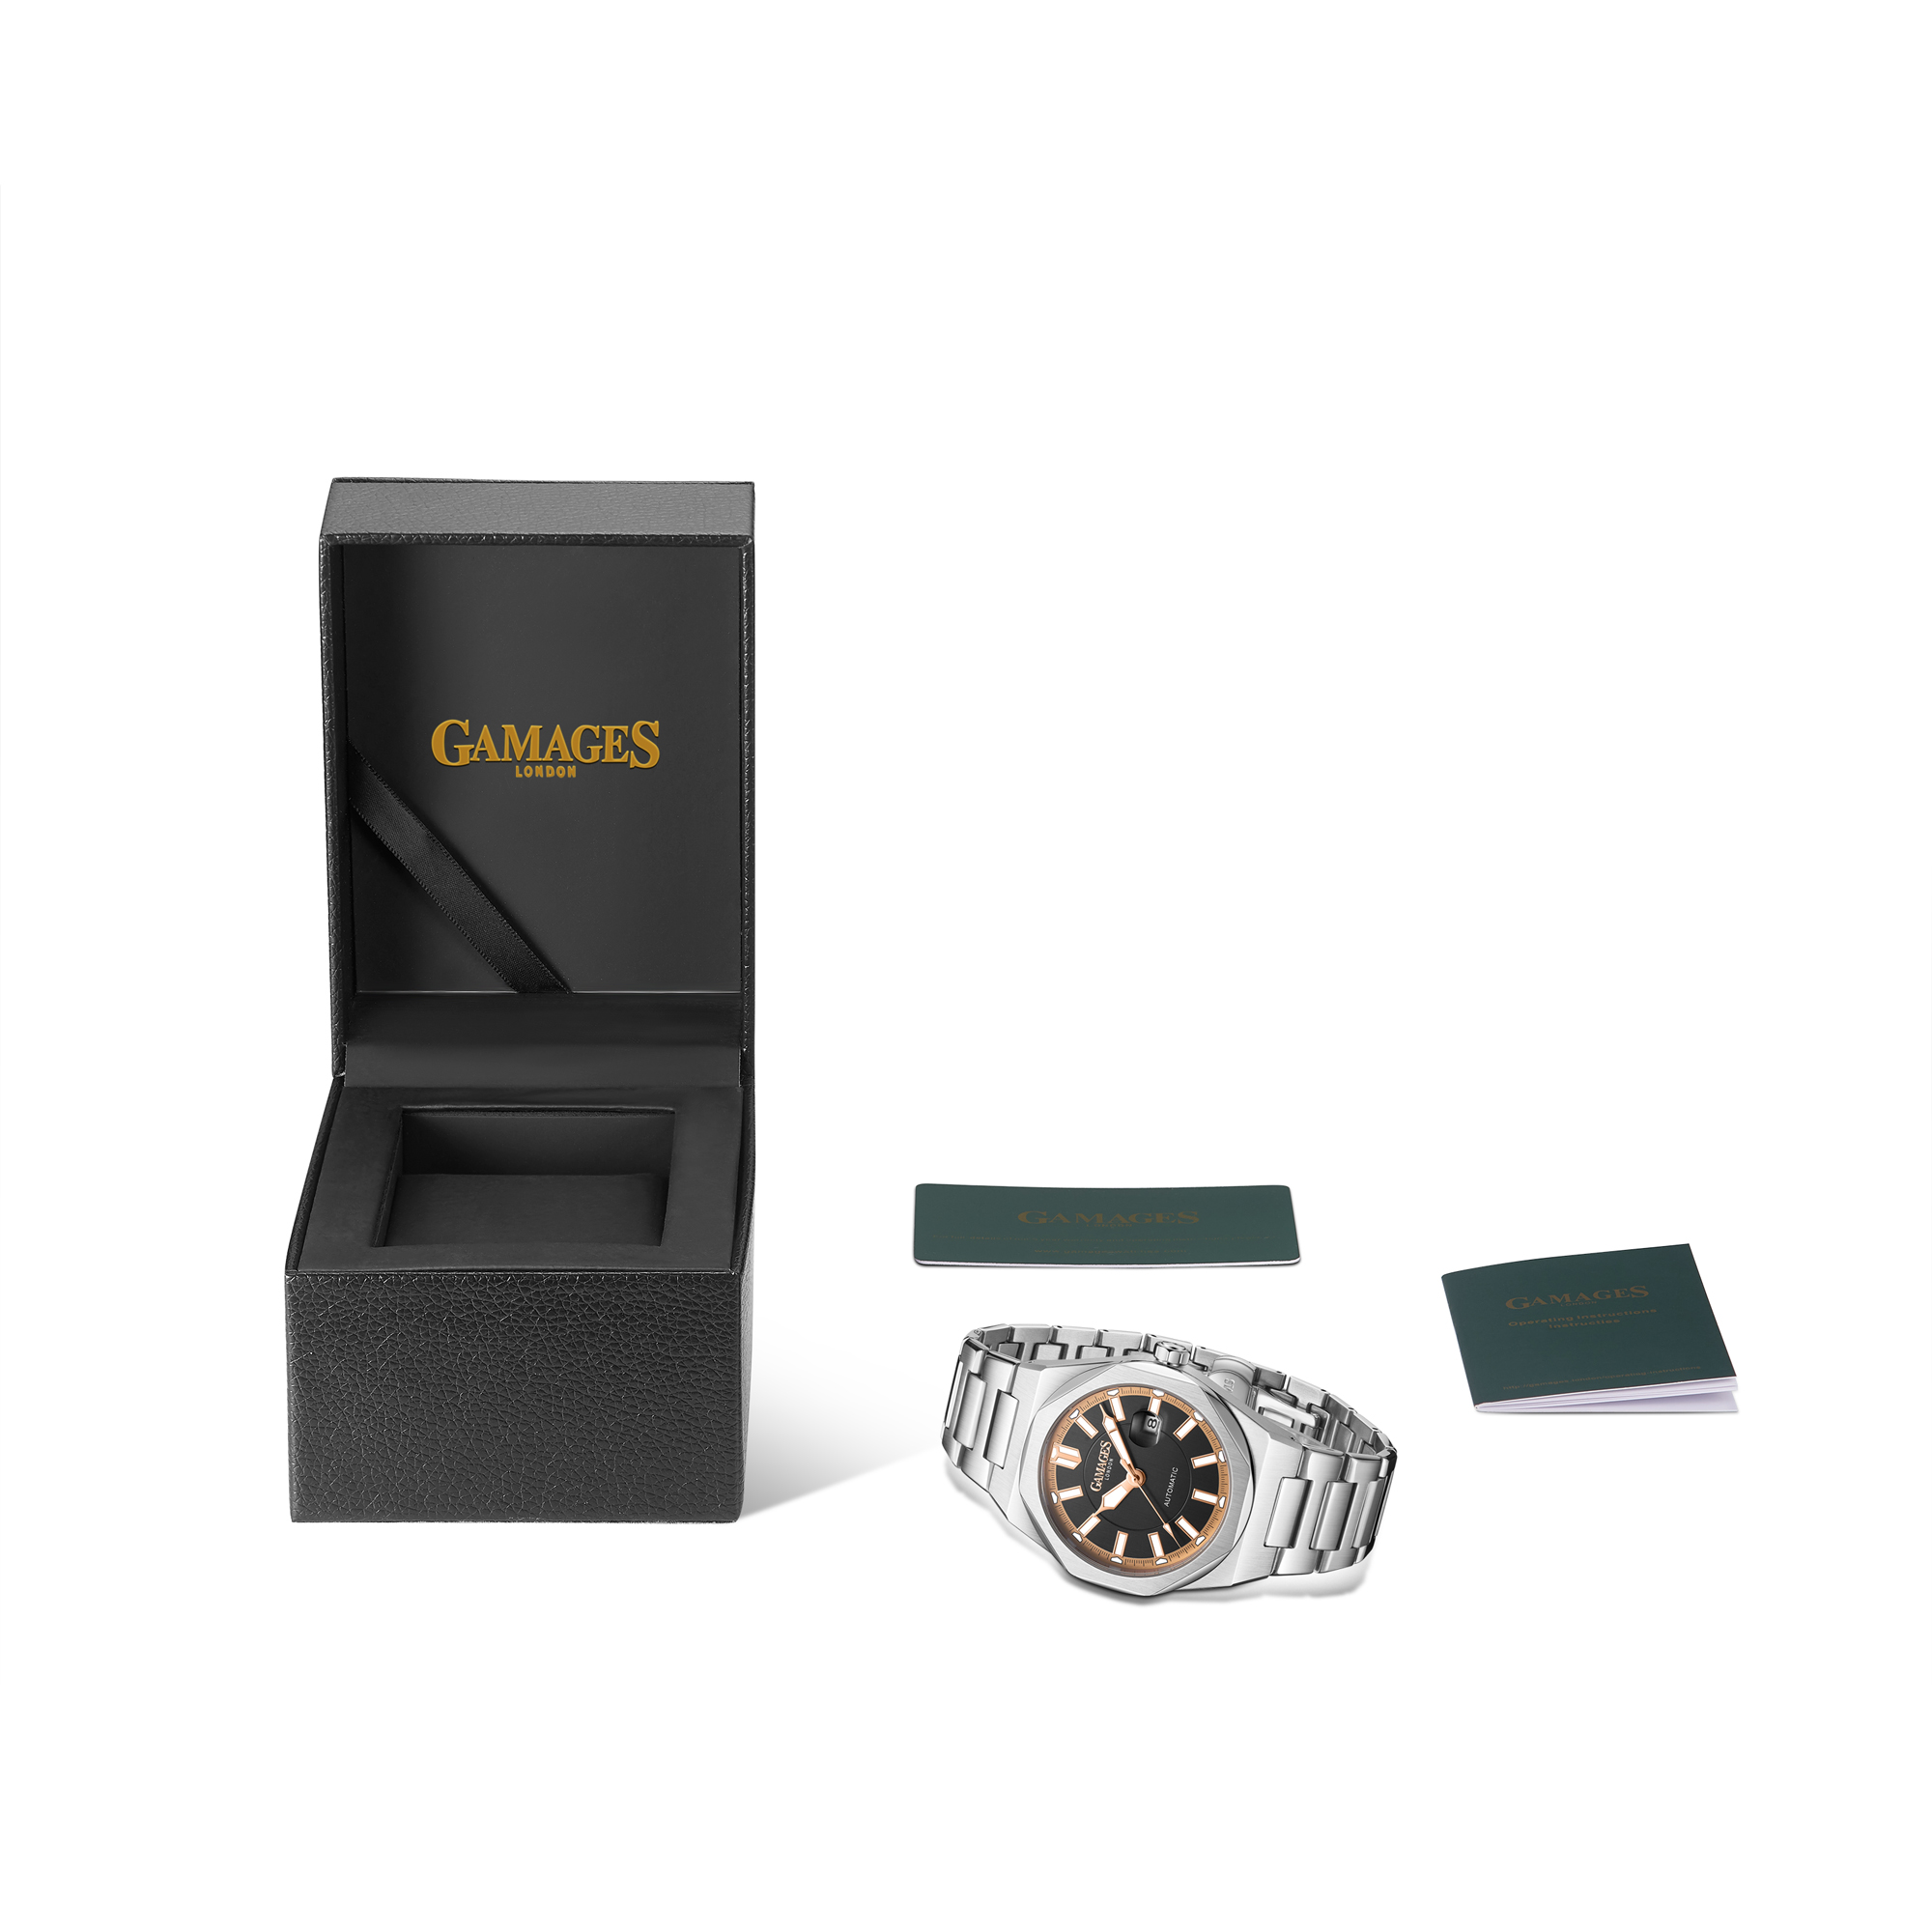 Ltd Edition Hand Assembled Gamages Quintessential Automatic Black – 5 Year Warranty & Free Delivery - Image 2 of 6